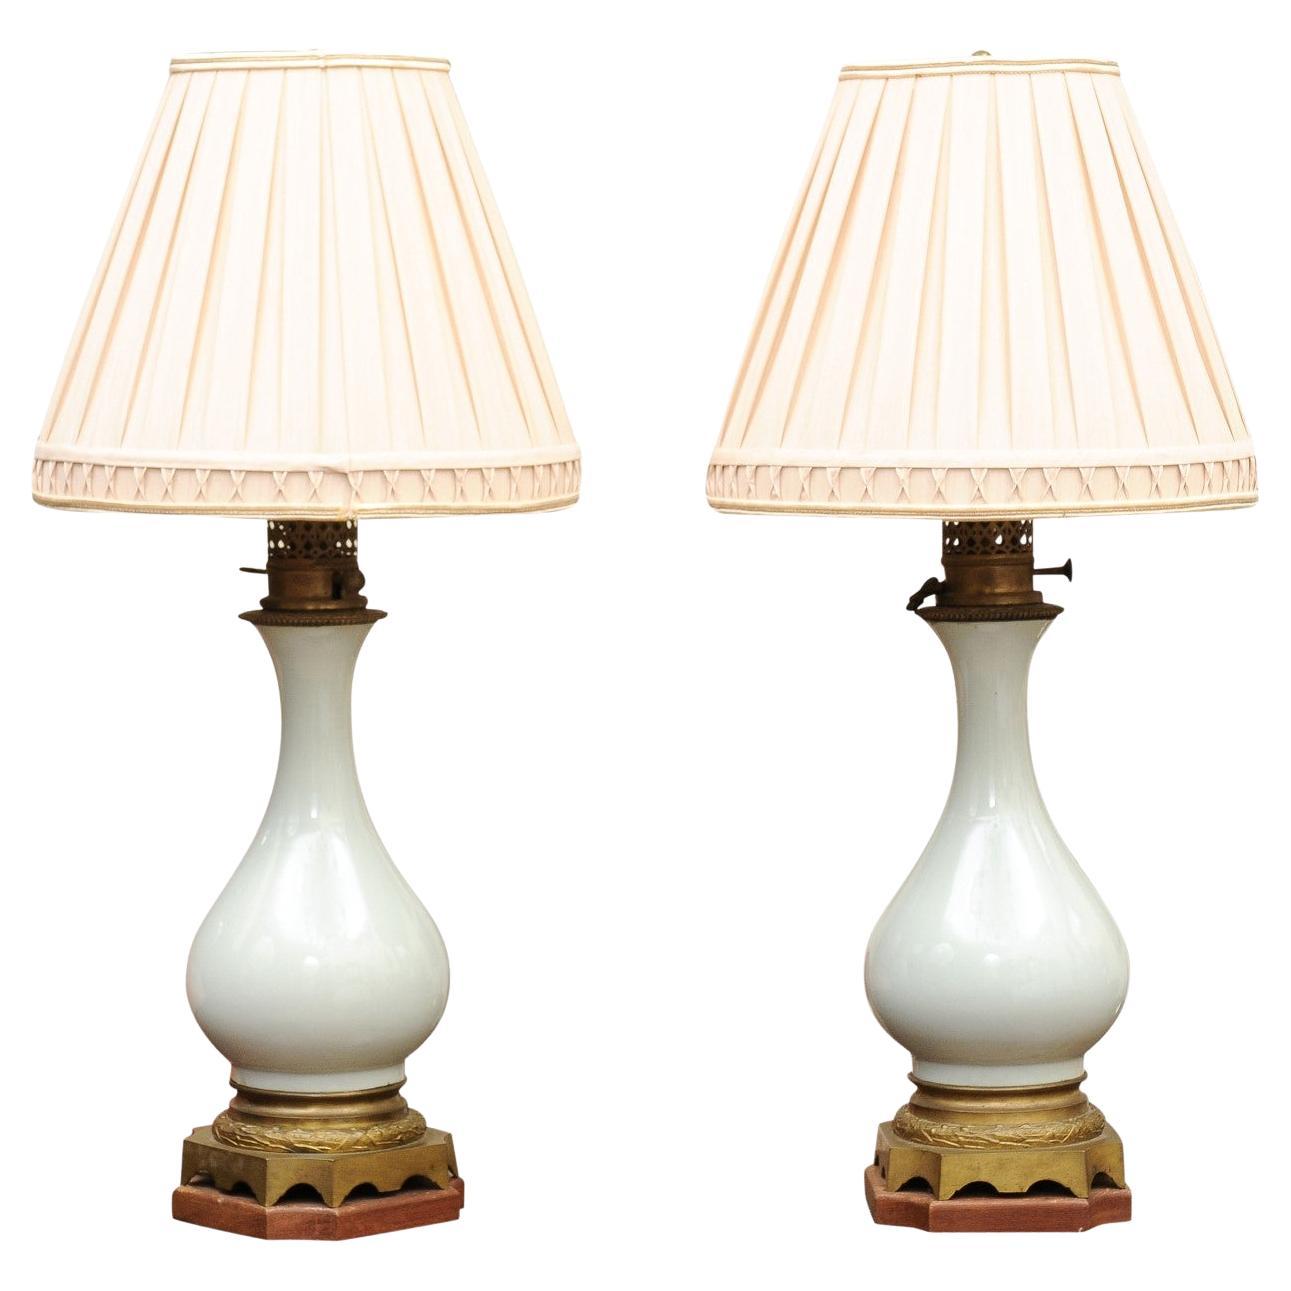 Pair of Celadon Porcelain Vases Mounted on Bronze Bases, Wired as lamps